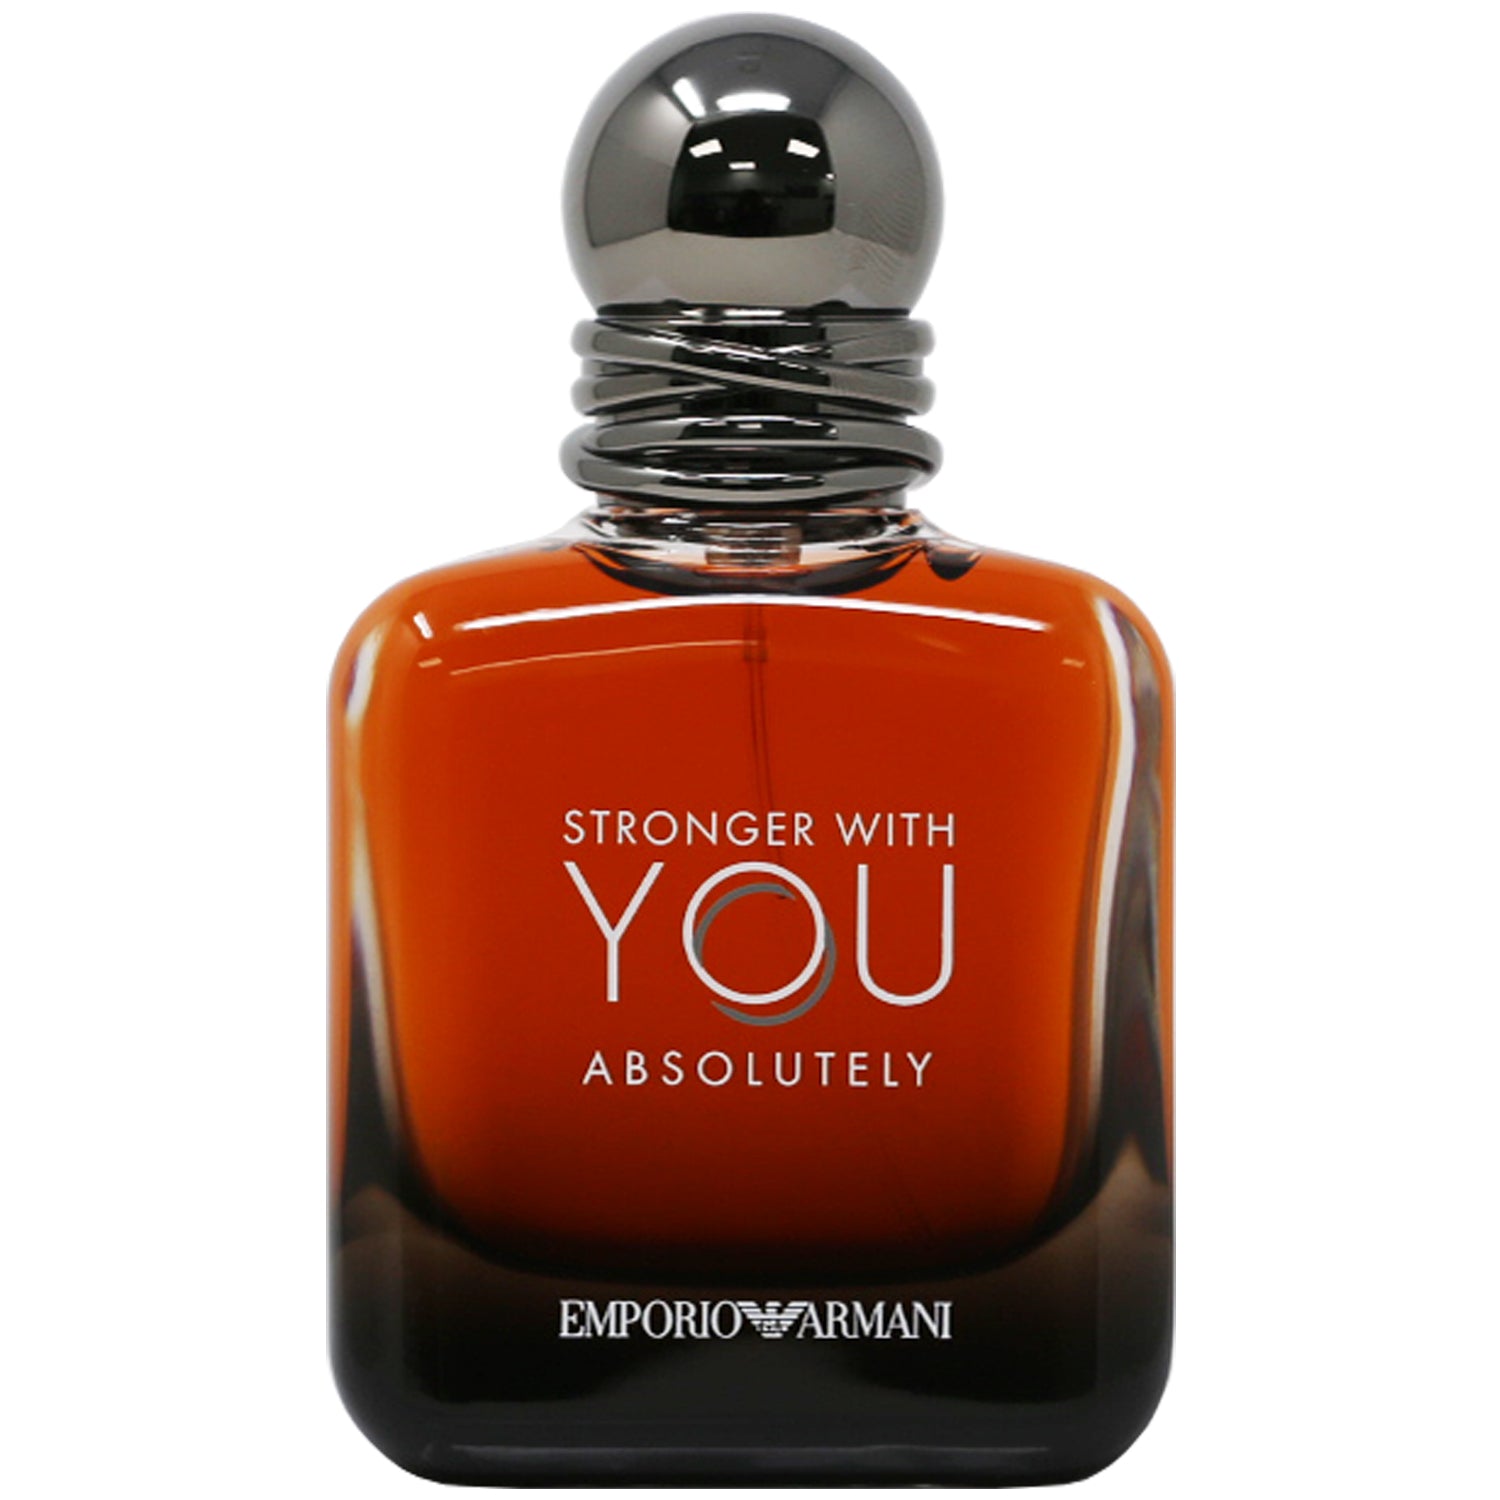 What does Stronger With You Absolutely by Emporio Armani smell like? T, Emporio Armani